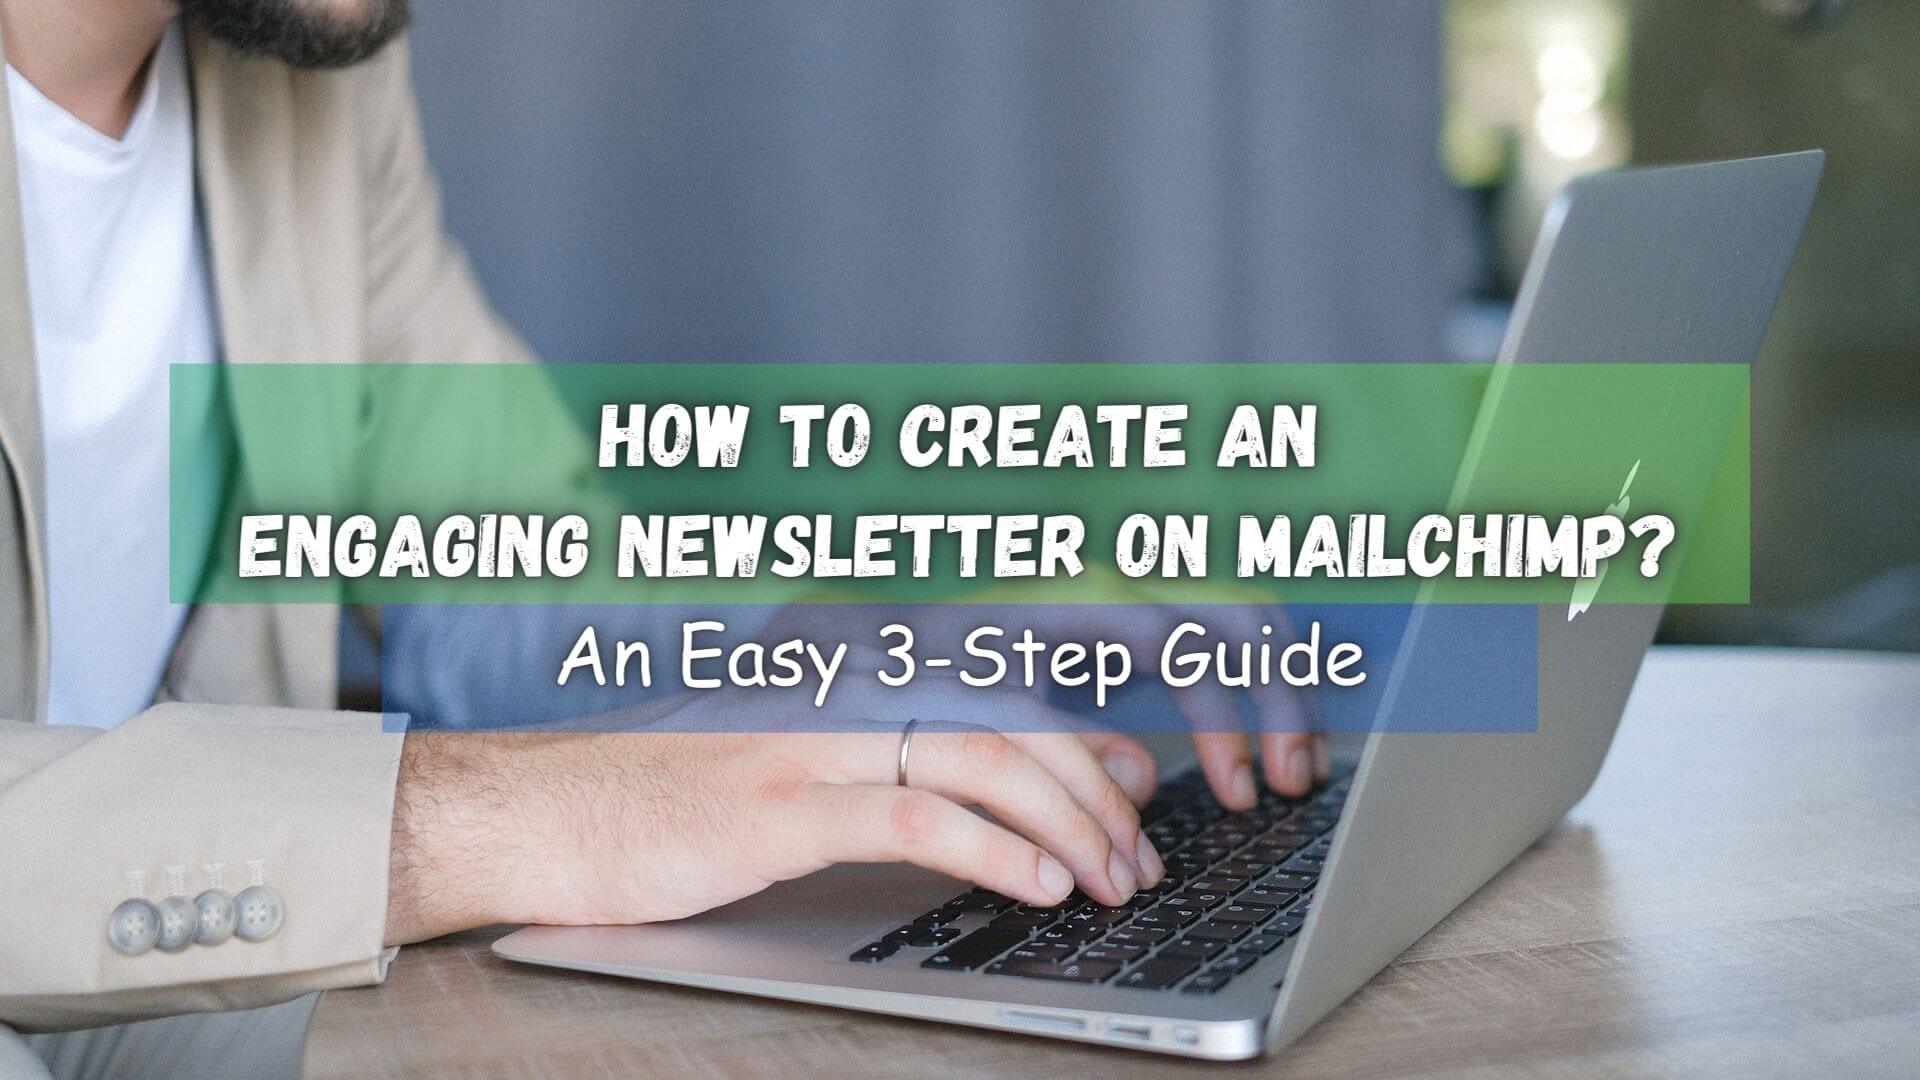 With Mailchimp, creating an engaging newsletter has never been easier. Click here to learn how to create a newsletter on Mailchimp.